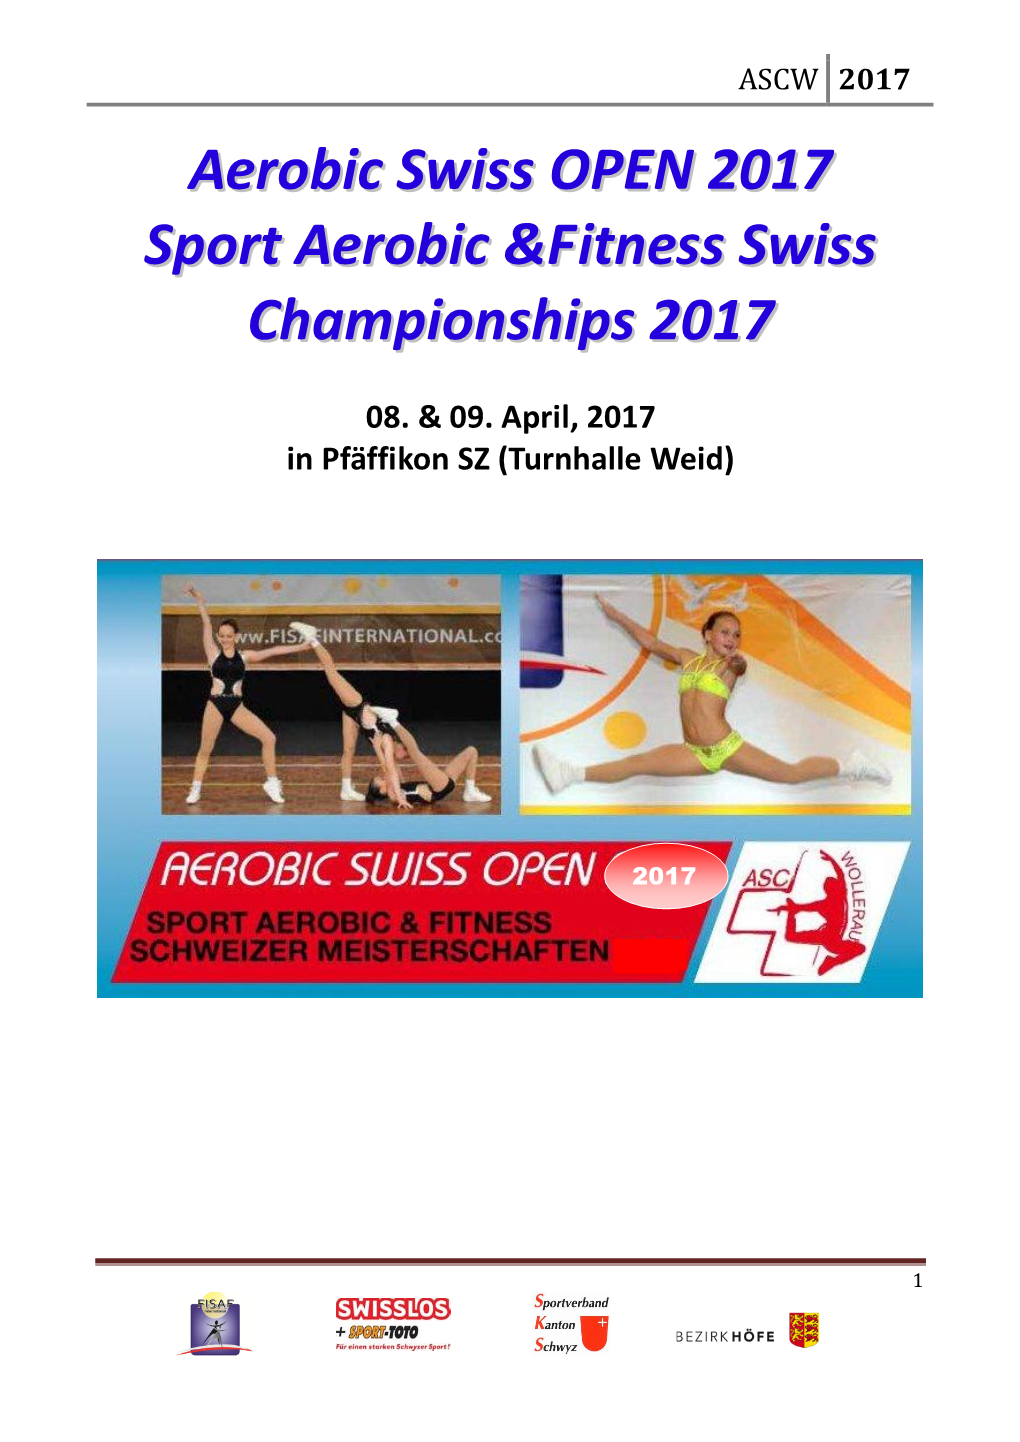 AEROBIC SWISS OPEN 2017 + NAME of TEAM Or ATHLETE’